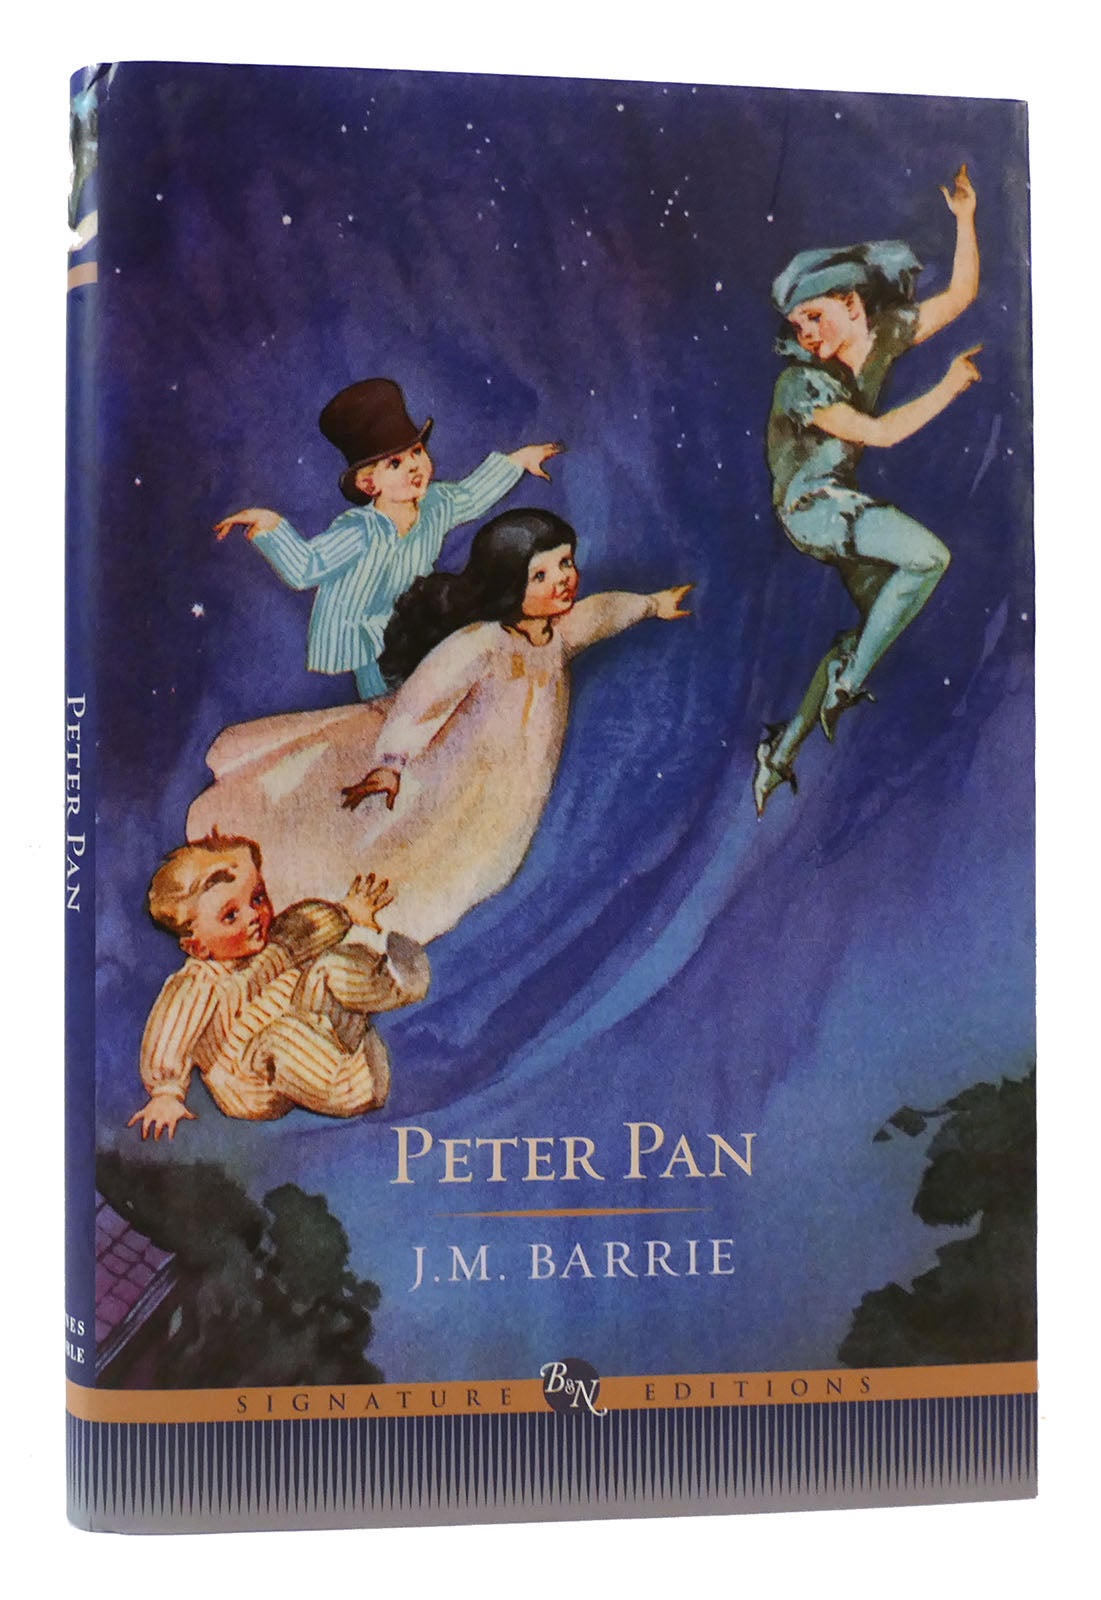 PETER PAN by J. M. Barrie on Rare Book Cellar